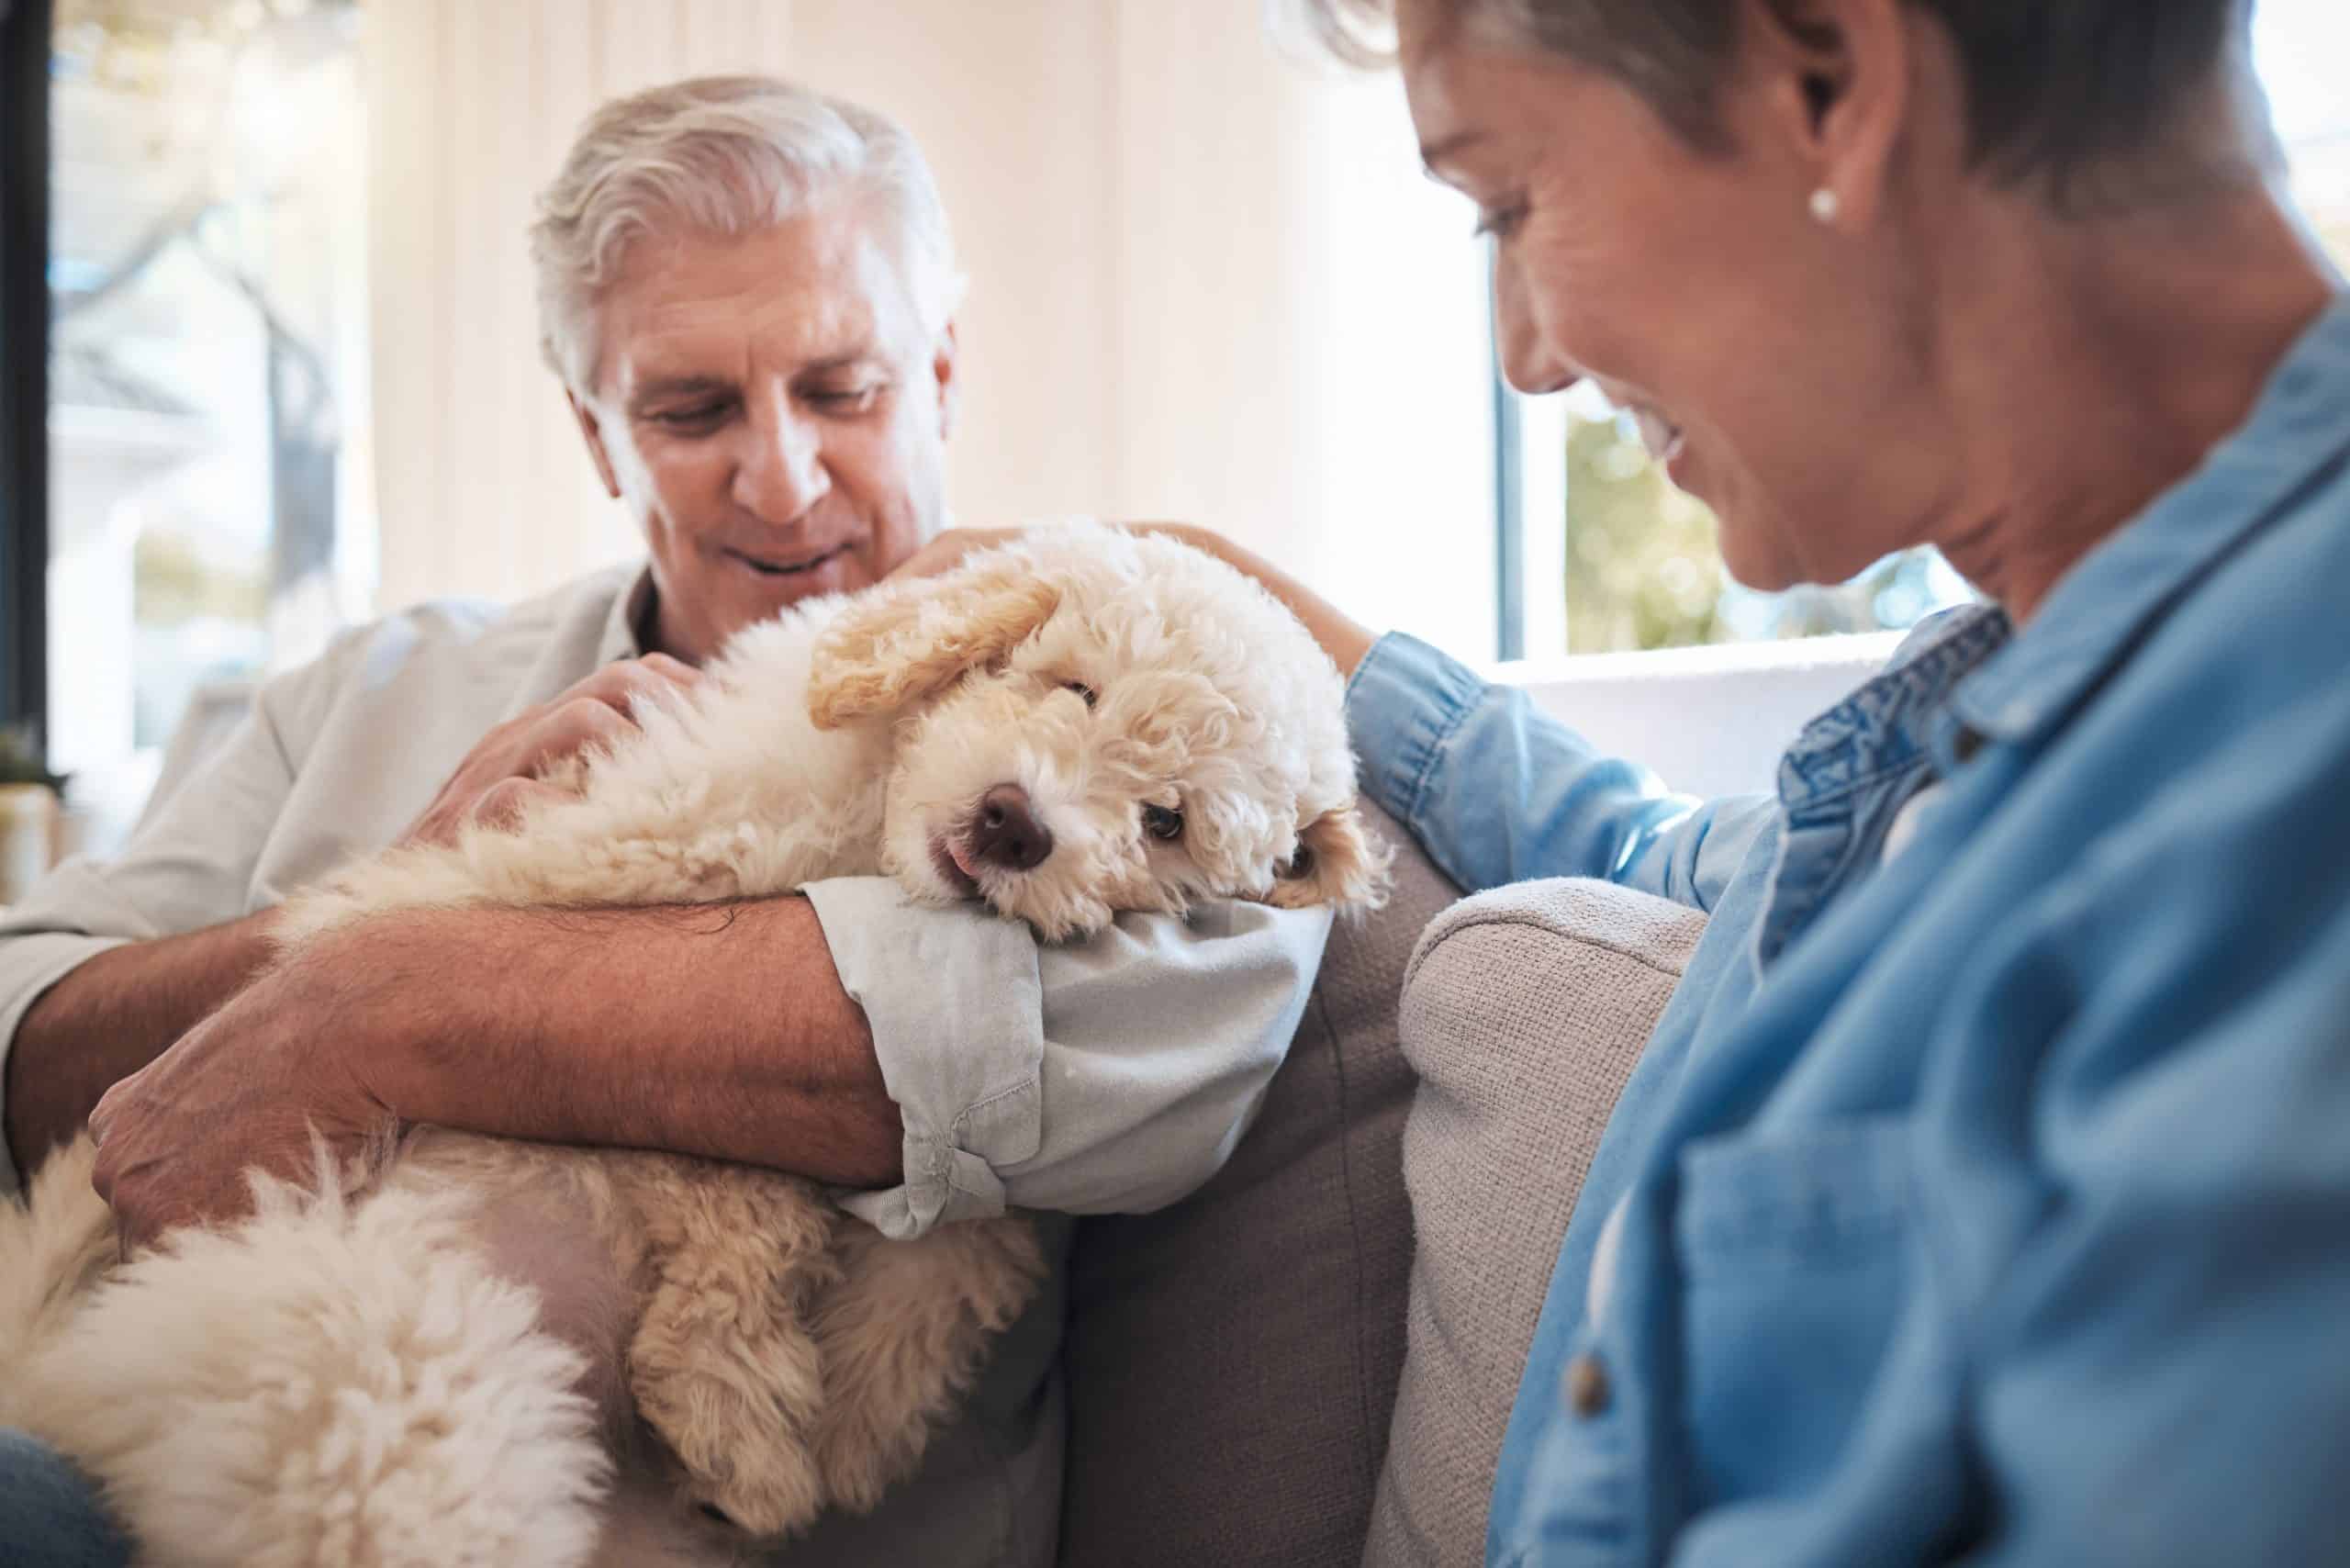 Retirement, dog and senior couple love, hug and care for puppy on sofa in a home for mental health and wellness. Elderly pension people on couch together with adopted animal pet friend for loyalty